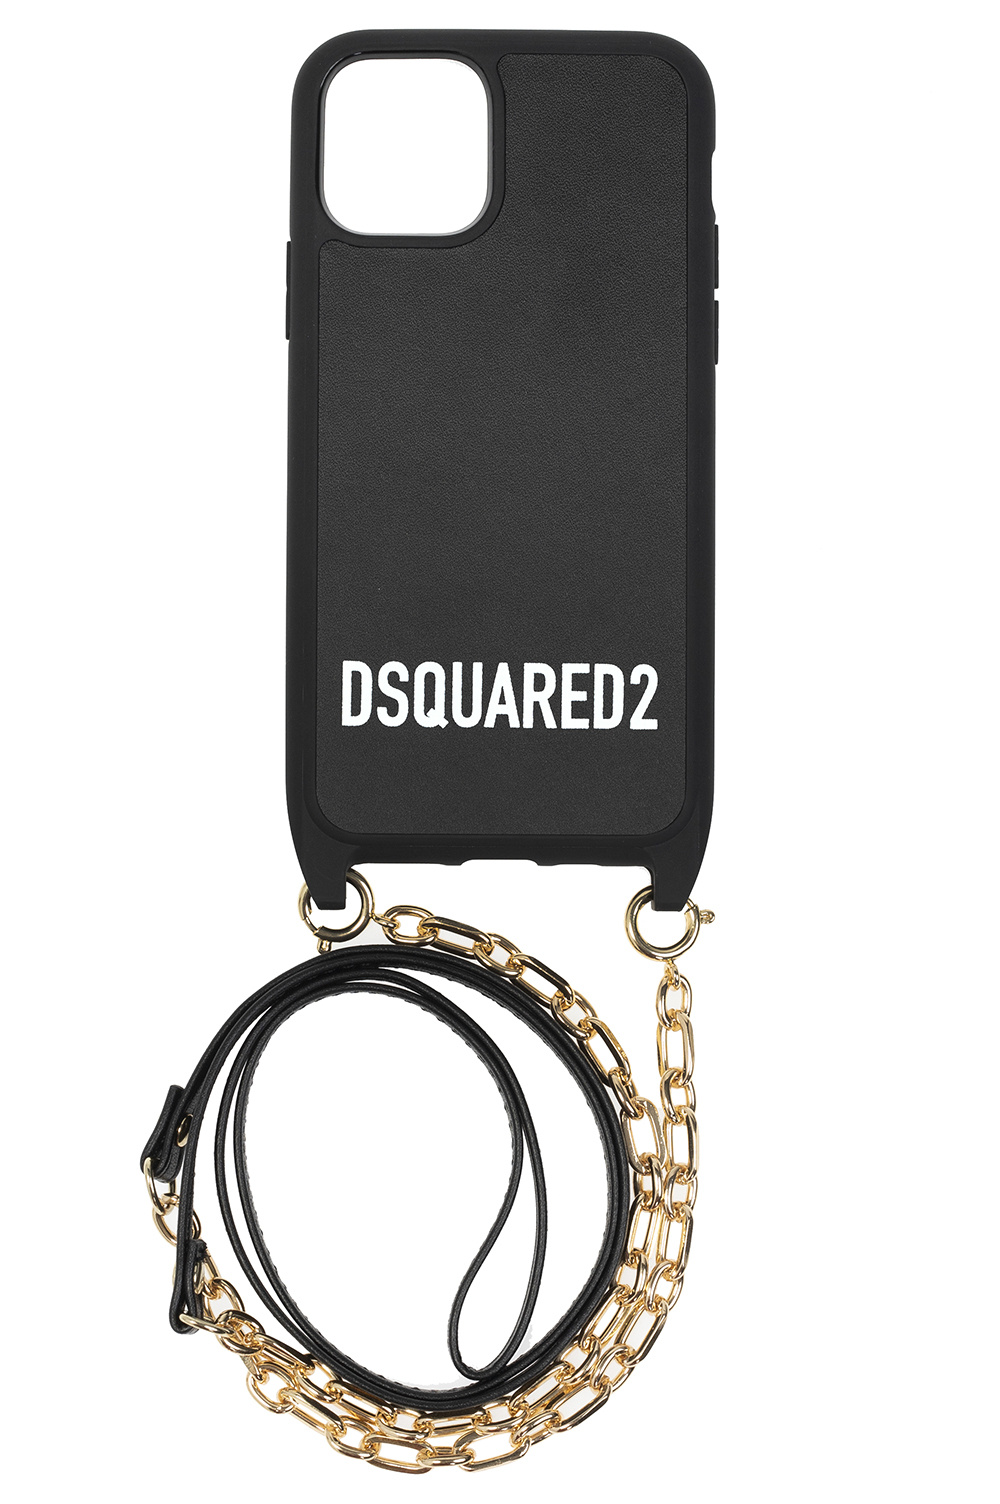 Dsquared2 iPhone 11 Pro case with logo